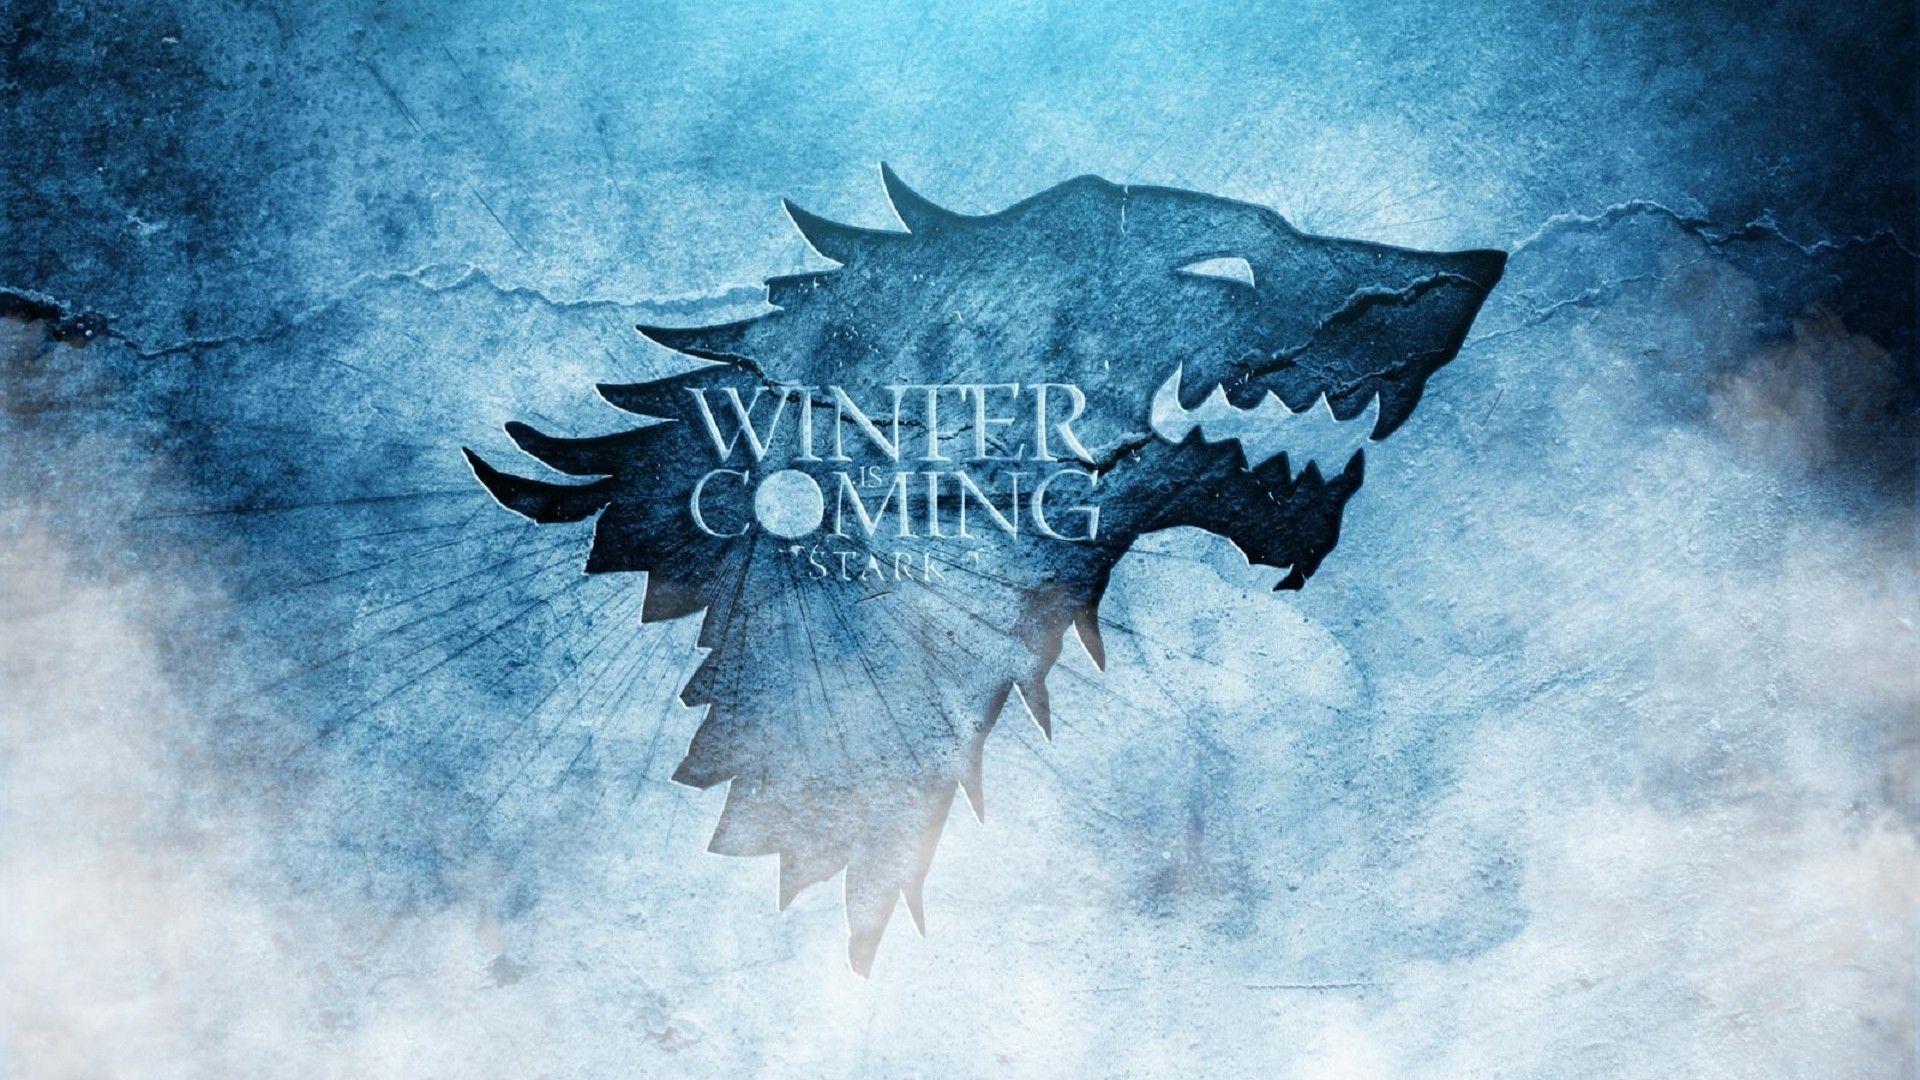 Game of Thrones Wallpapers - Top Free